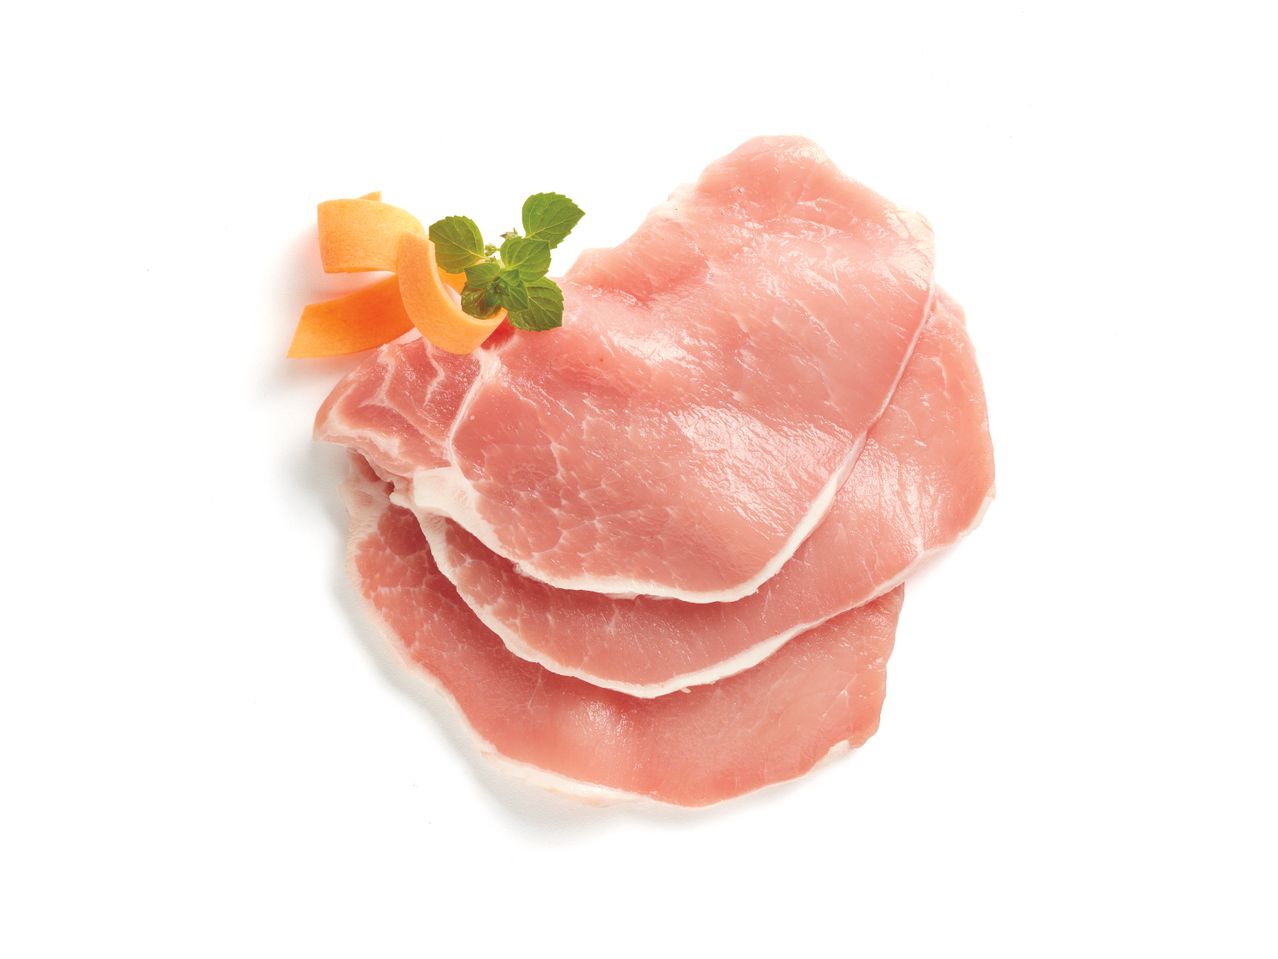 Go to full screen view: Pork Loin Slices - Image 1